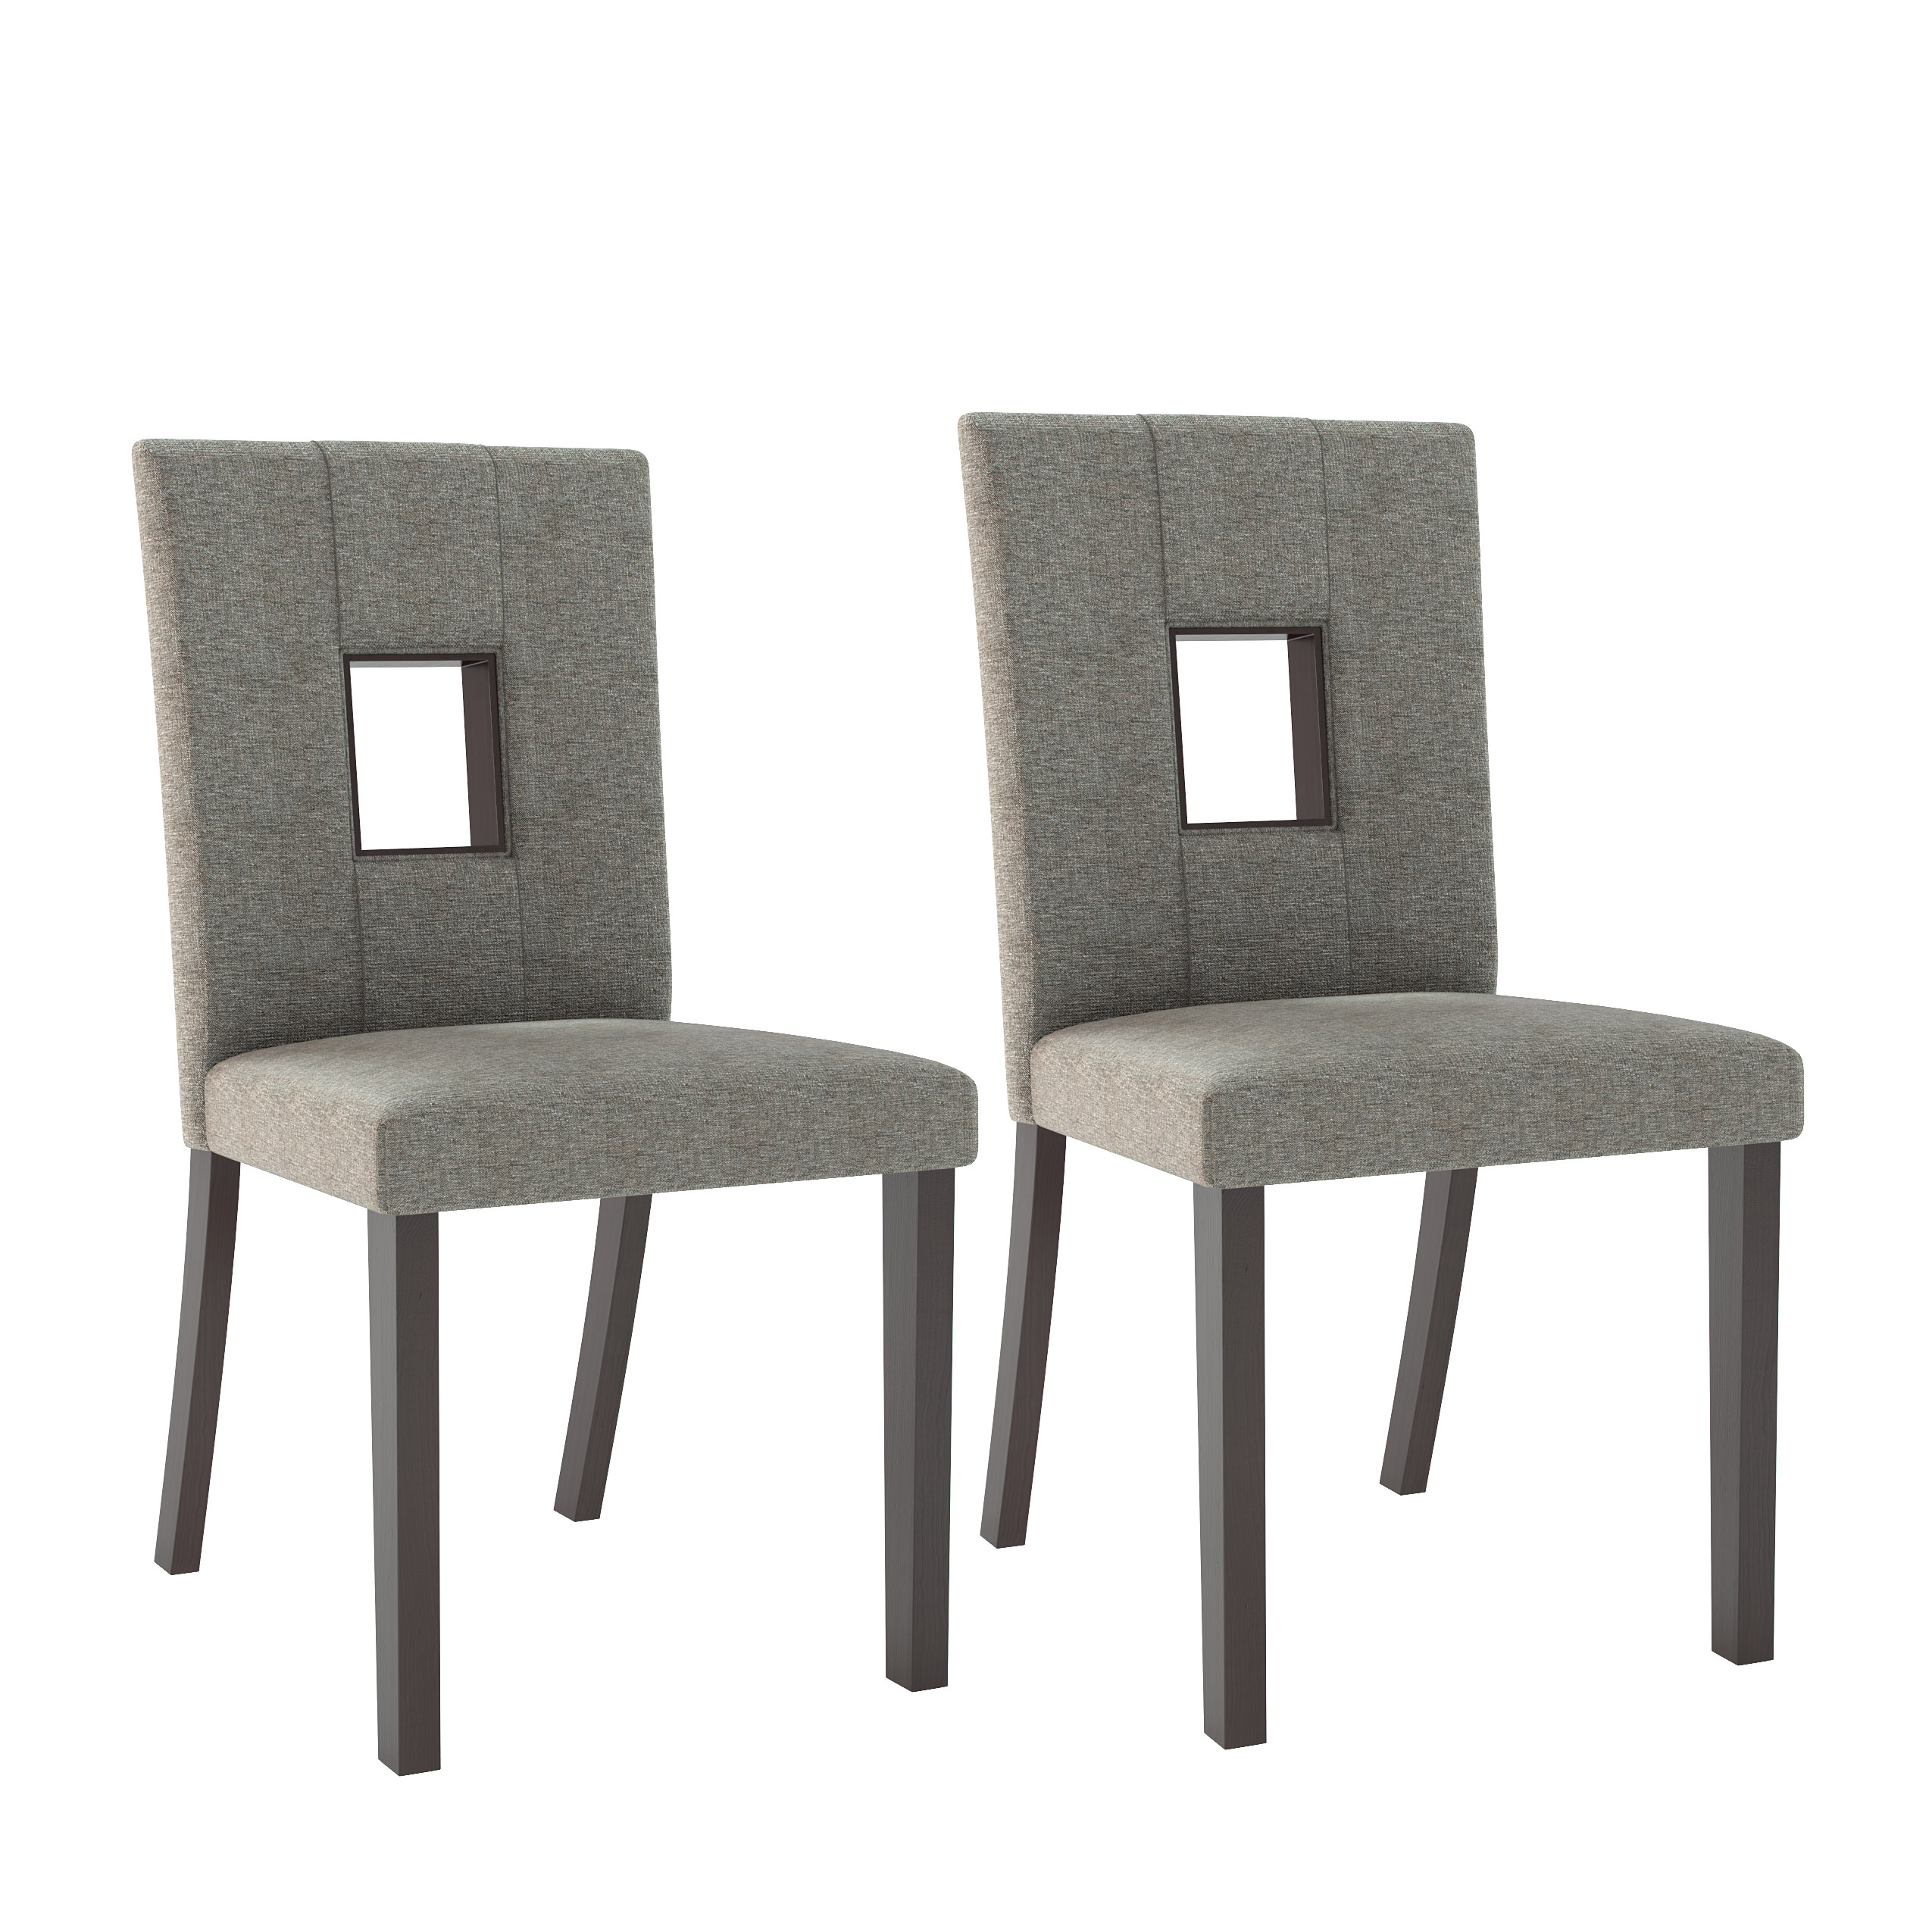 CorLiving Bistro Dining Chairs, set of 2